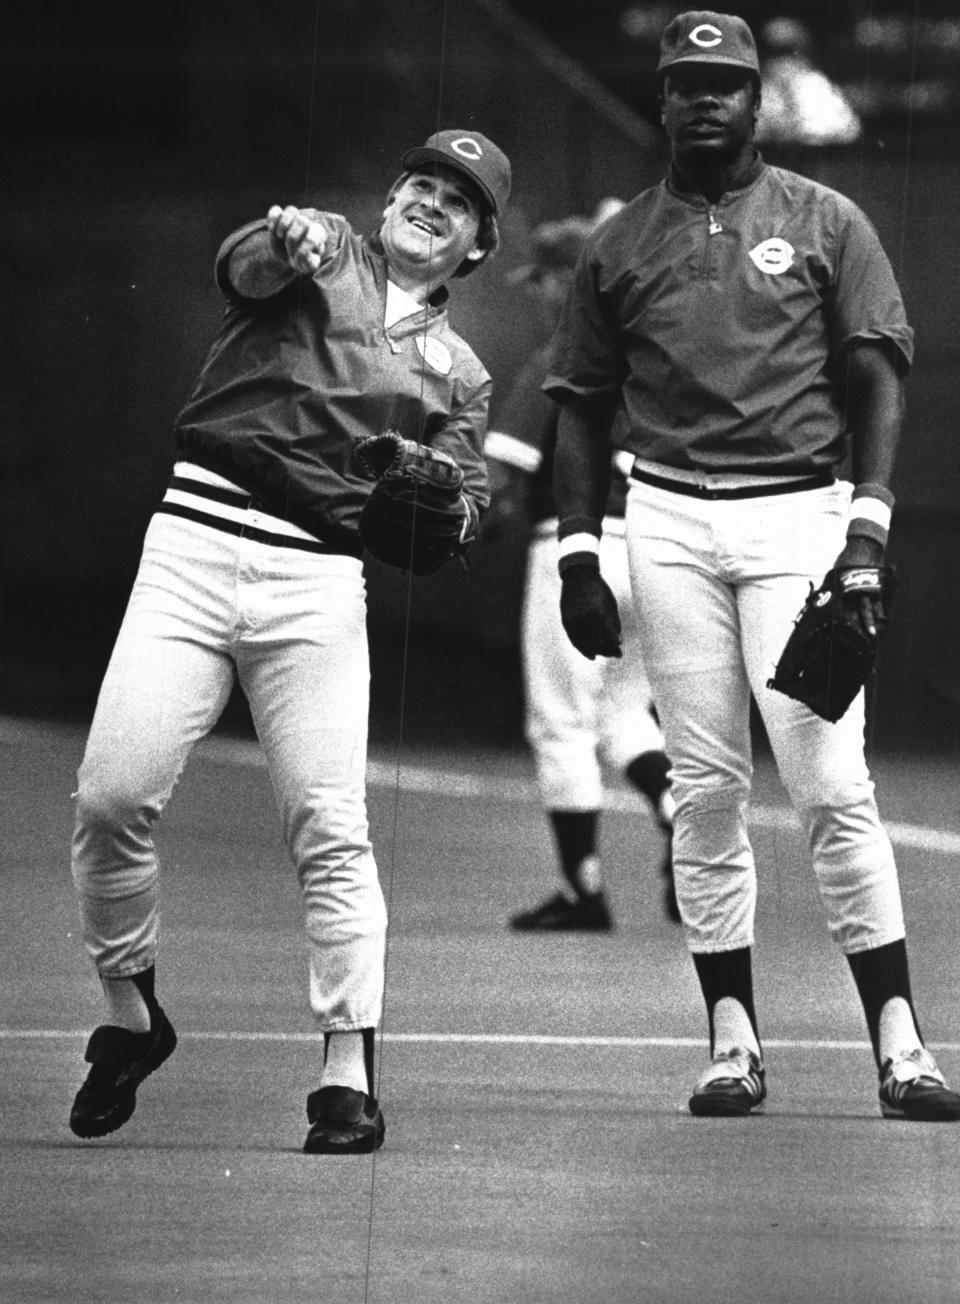 SEPTEMBER 11, 1985: The expressions of the faces of Dave Parker and Pete Rose tell a lot about what they have been going through lately. Rose, of course, is about to break Ty Cobb's all-time record for career hits, baseball's oldest major record, while Parker is about to appear in the trial of an accused Pittsburgh drug dealer.